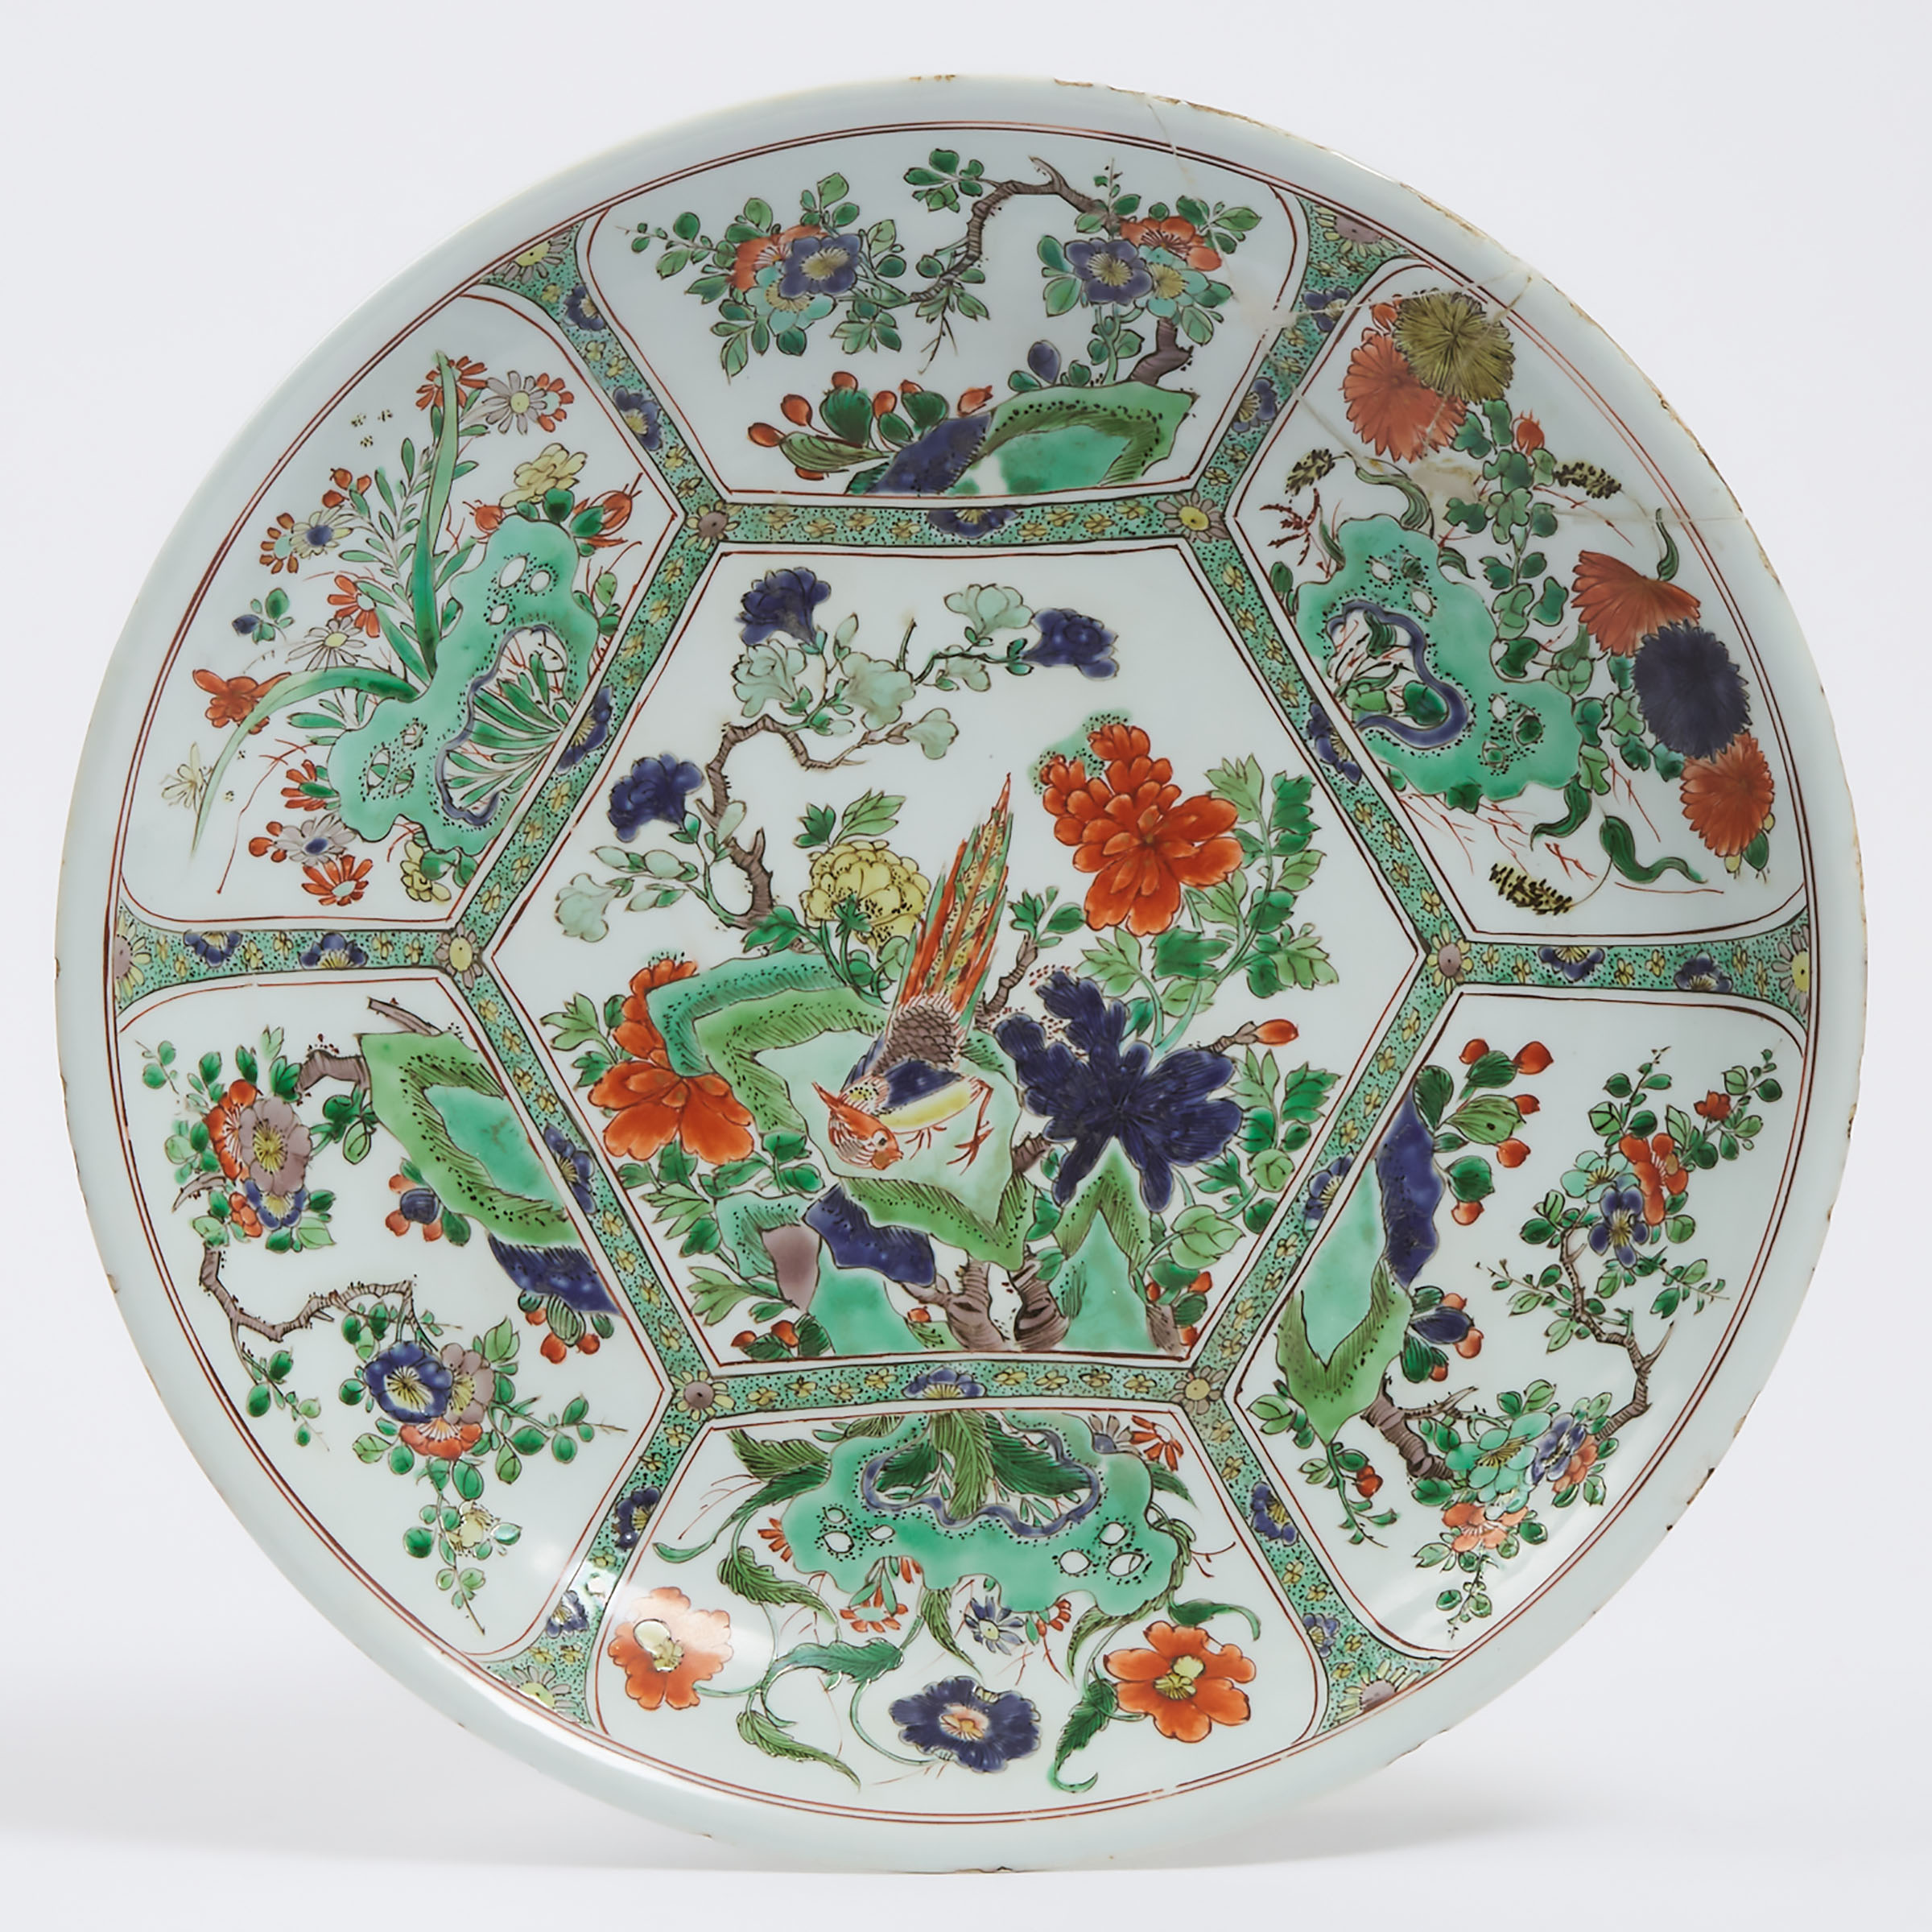 A Chinese Wucai 'Pheasant and Peony' Charger, Kangxi Period, Early 18th Century